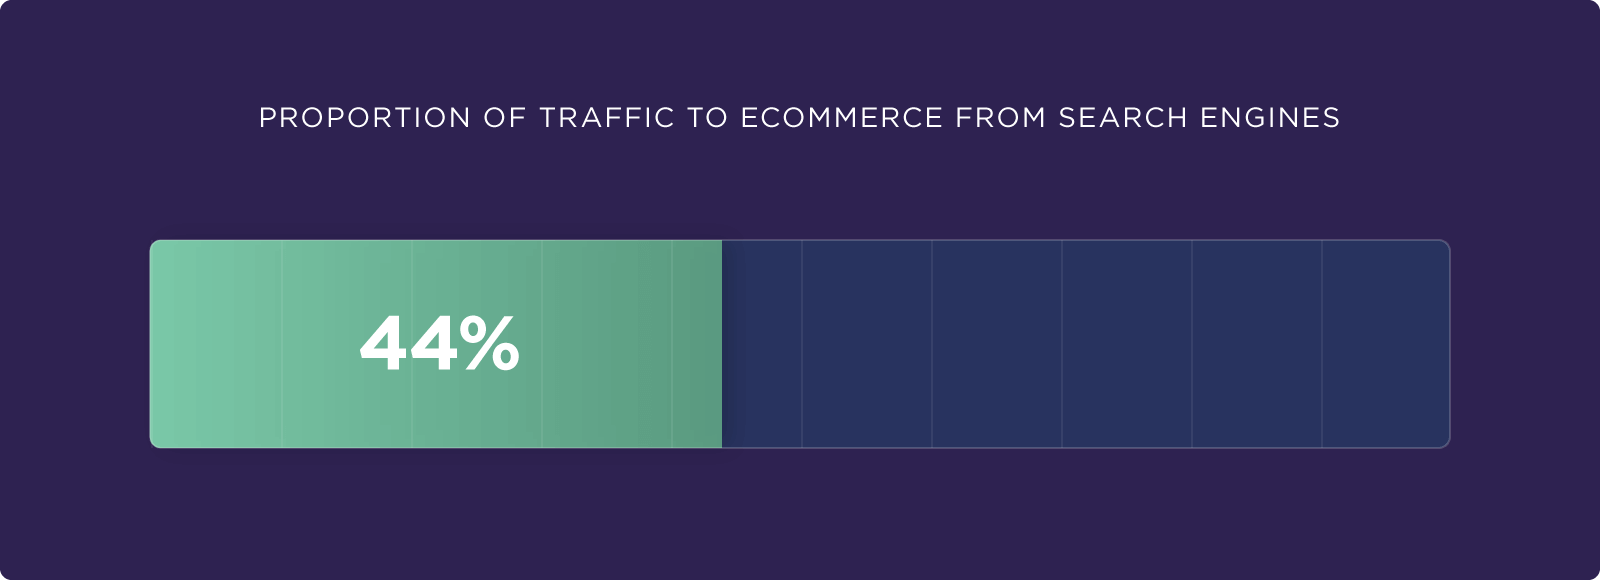 Proportion of traffic to ecommerce from search engines